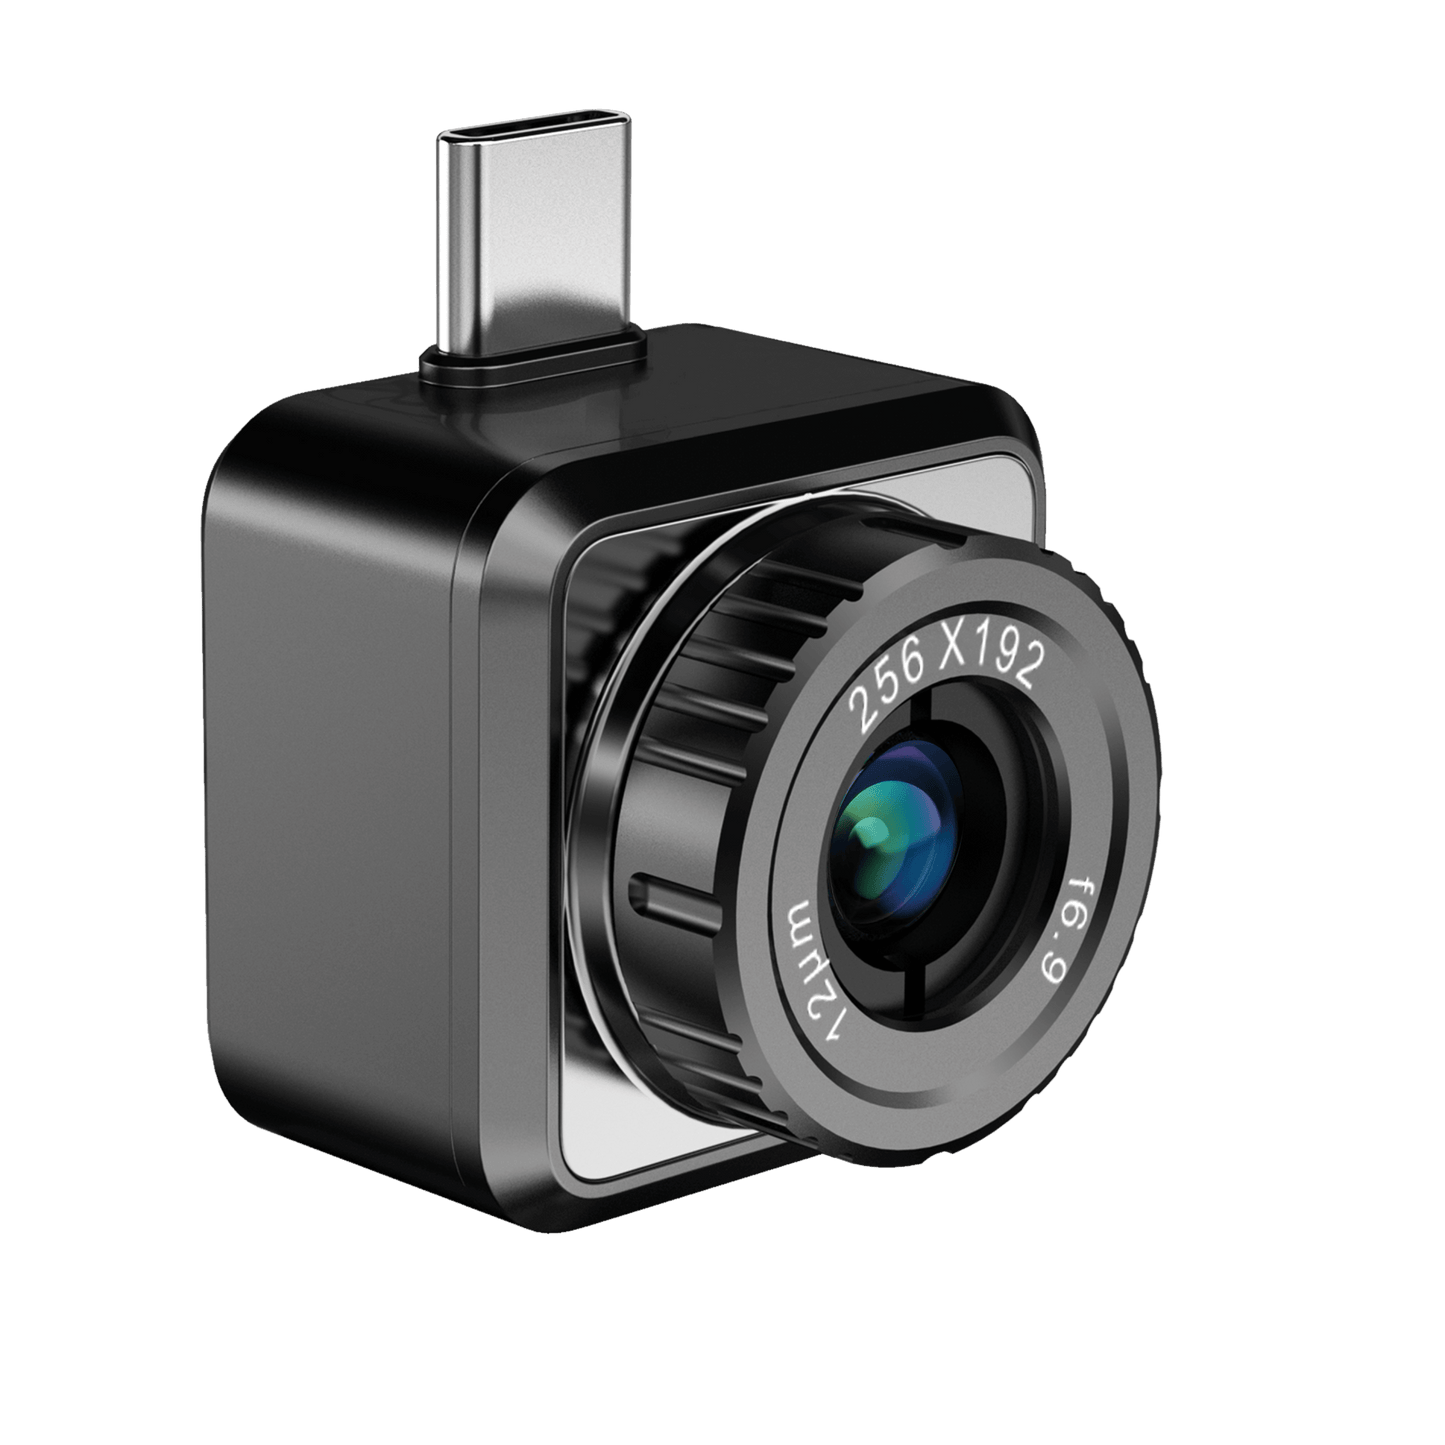 Hikmicro Mini2Plus Thermal Imaging Camera for Android Front Right view